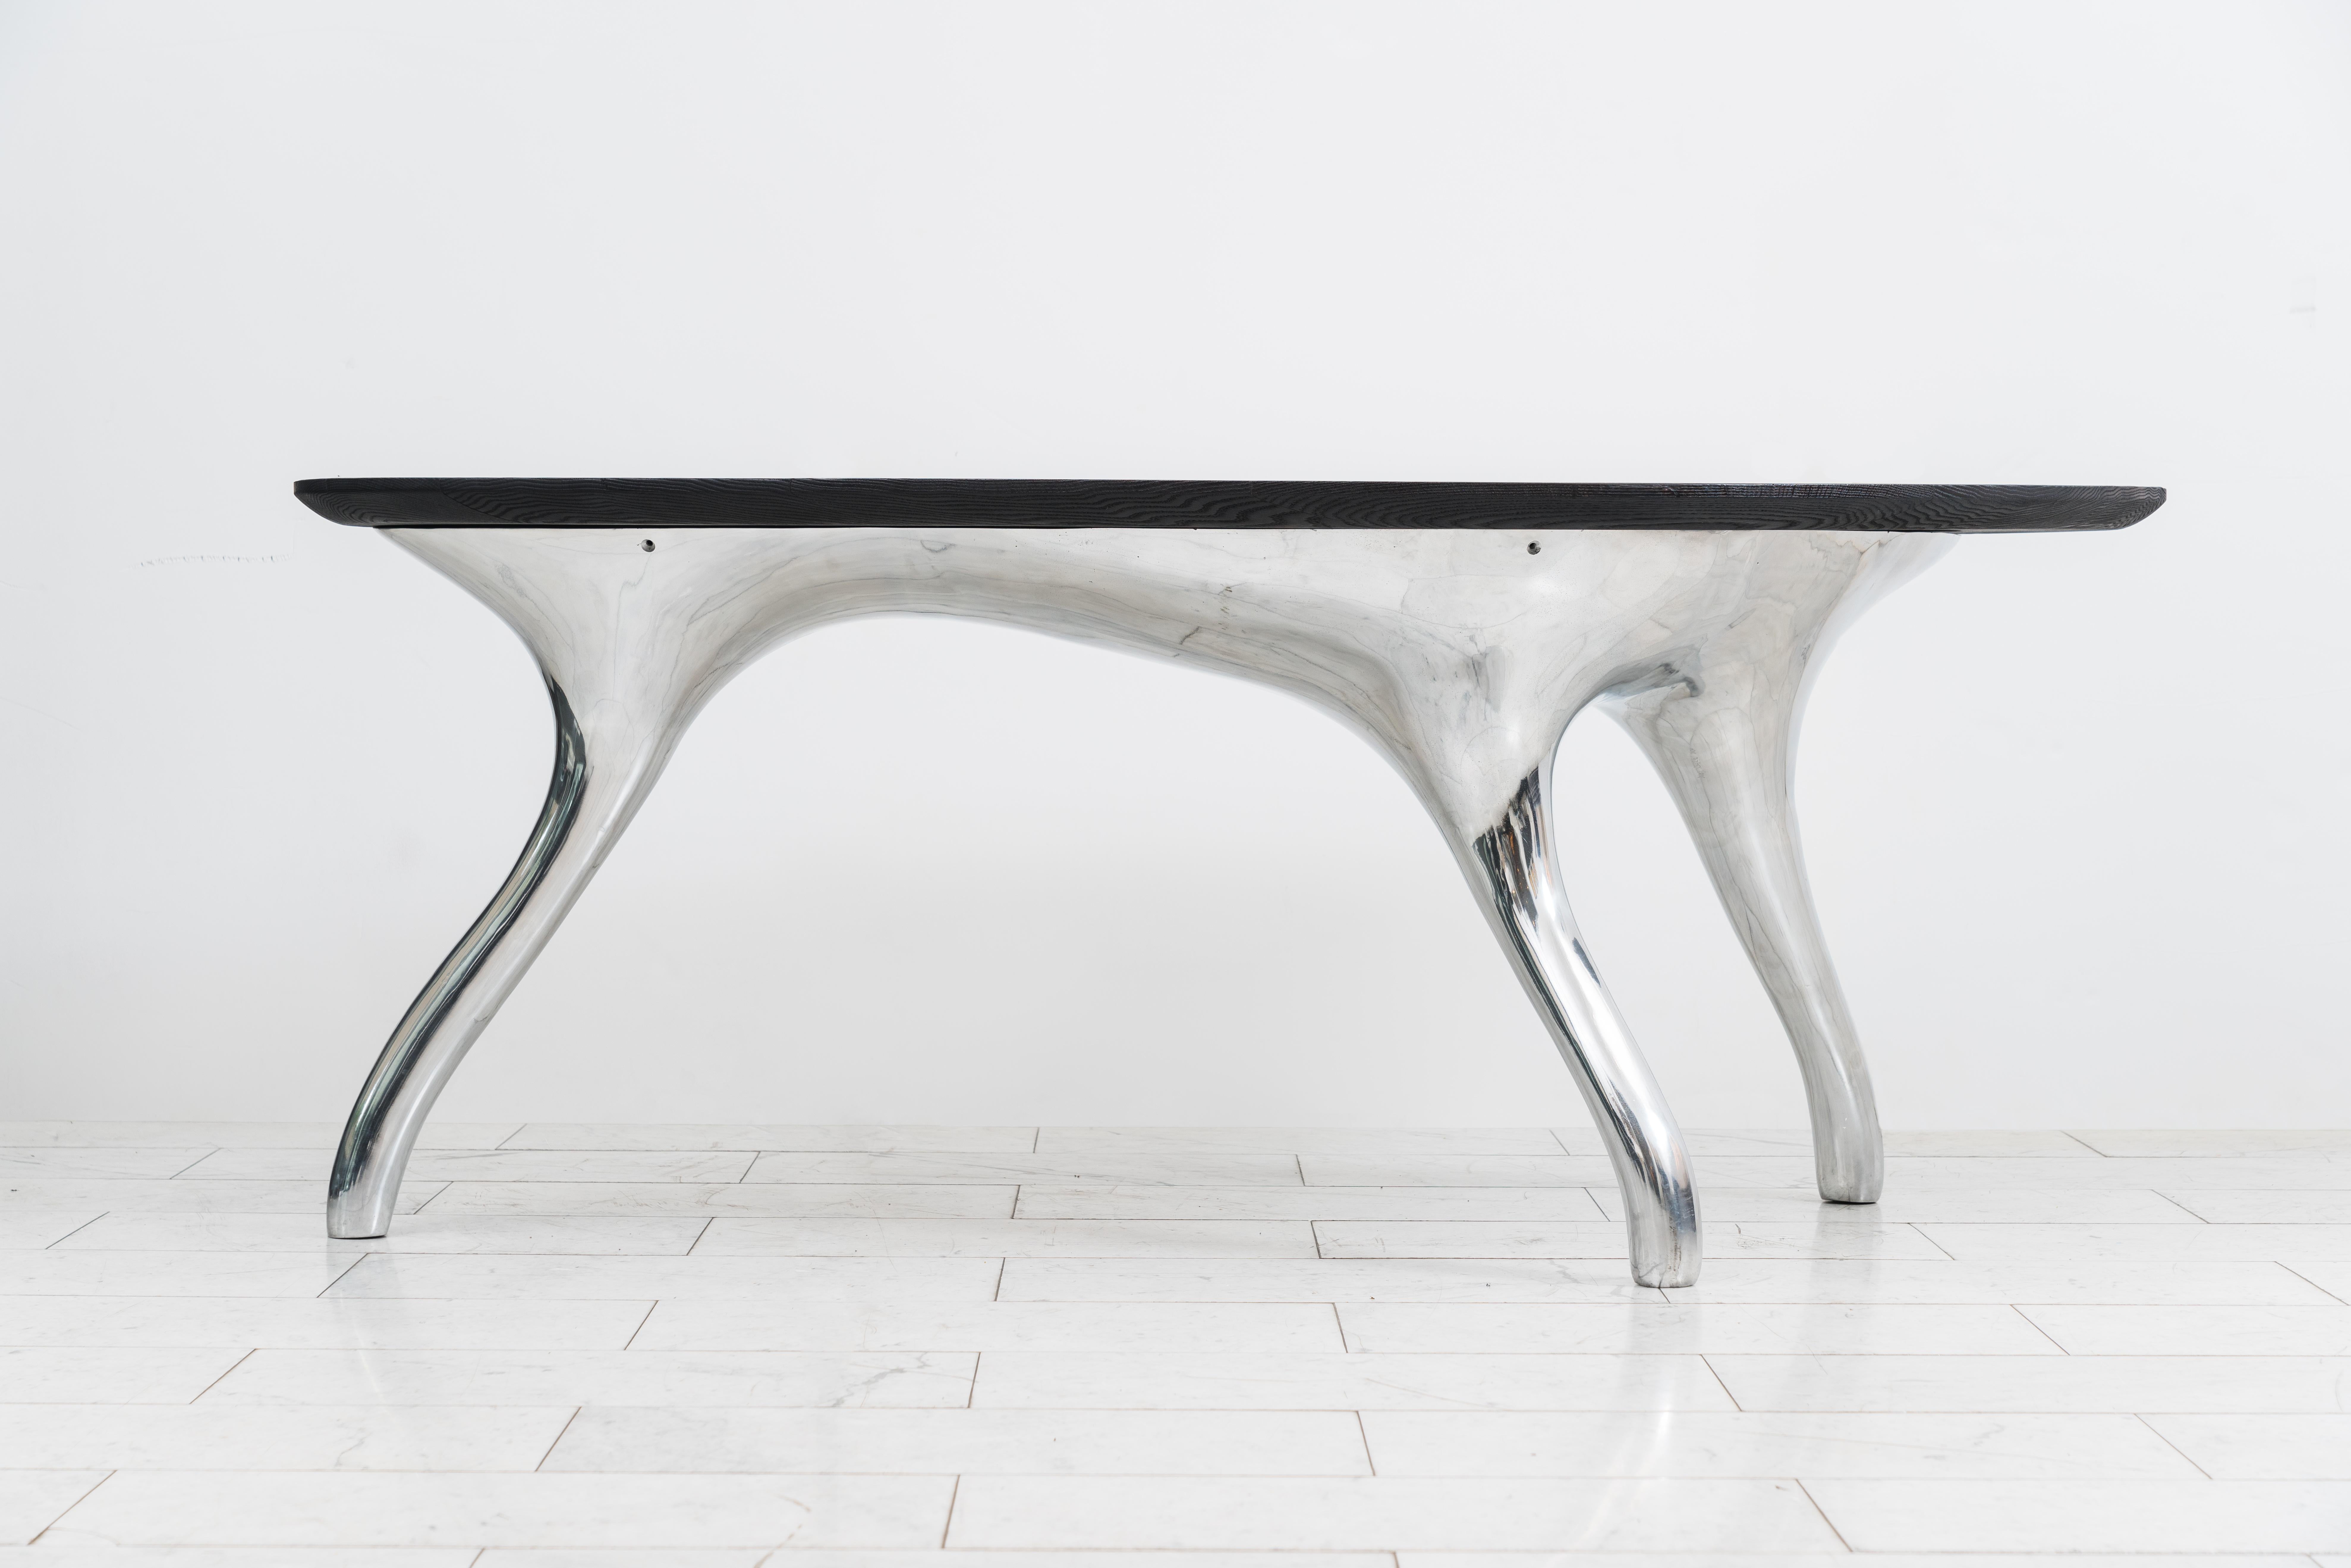 Alex Roskin’s Trois Jambes Dining Table rests on a sparkling tripod base of mirror-polished stainless steel, the asymmetric table top is shown with a wood top finished in the shou sugi ban method. Available by commission, the table can be customized